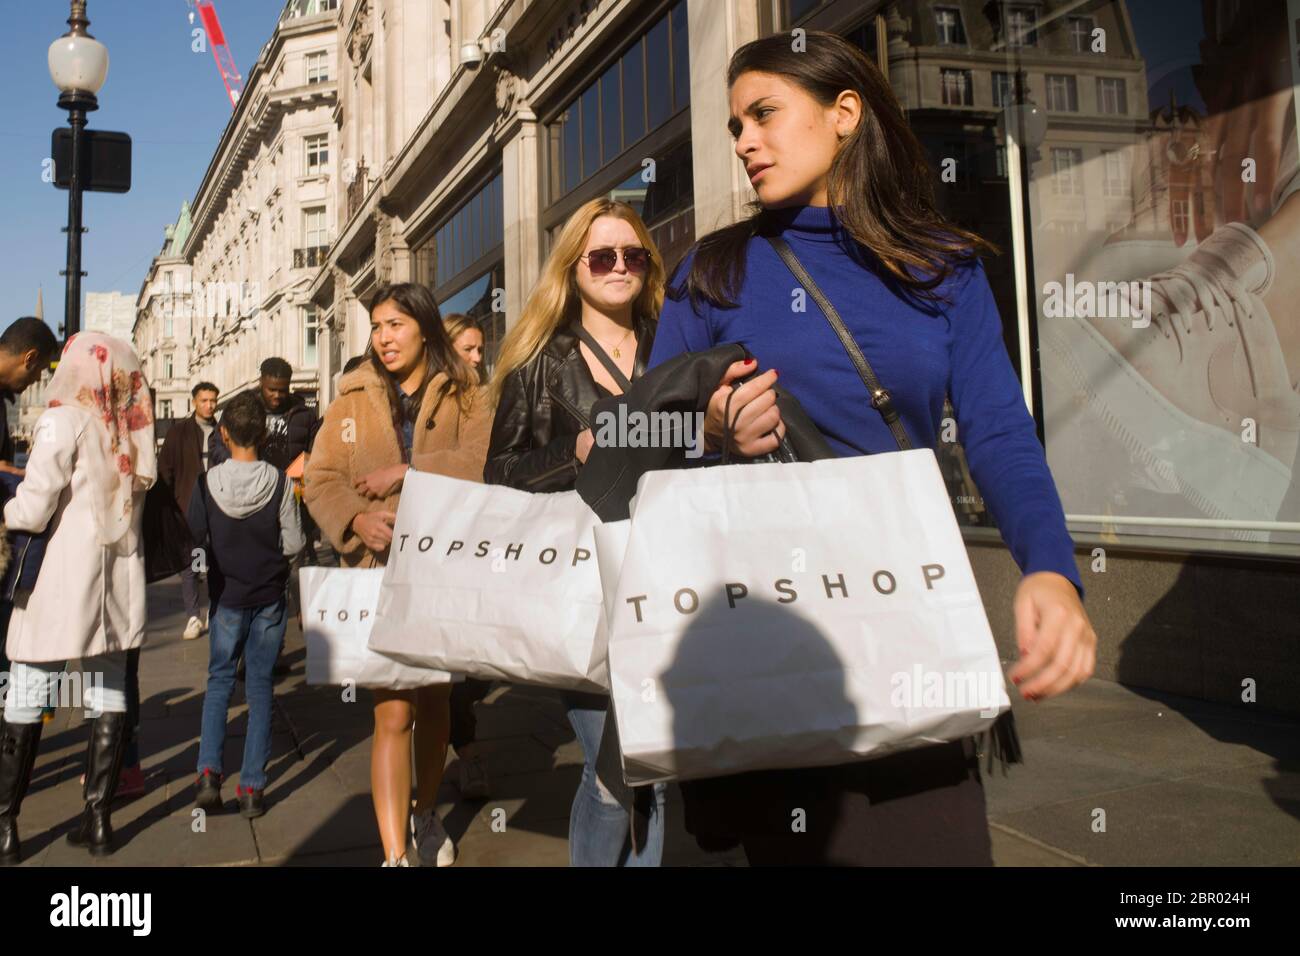 Three women with identical Top Shop bags walking in Oxford Street. Stock Photo